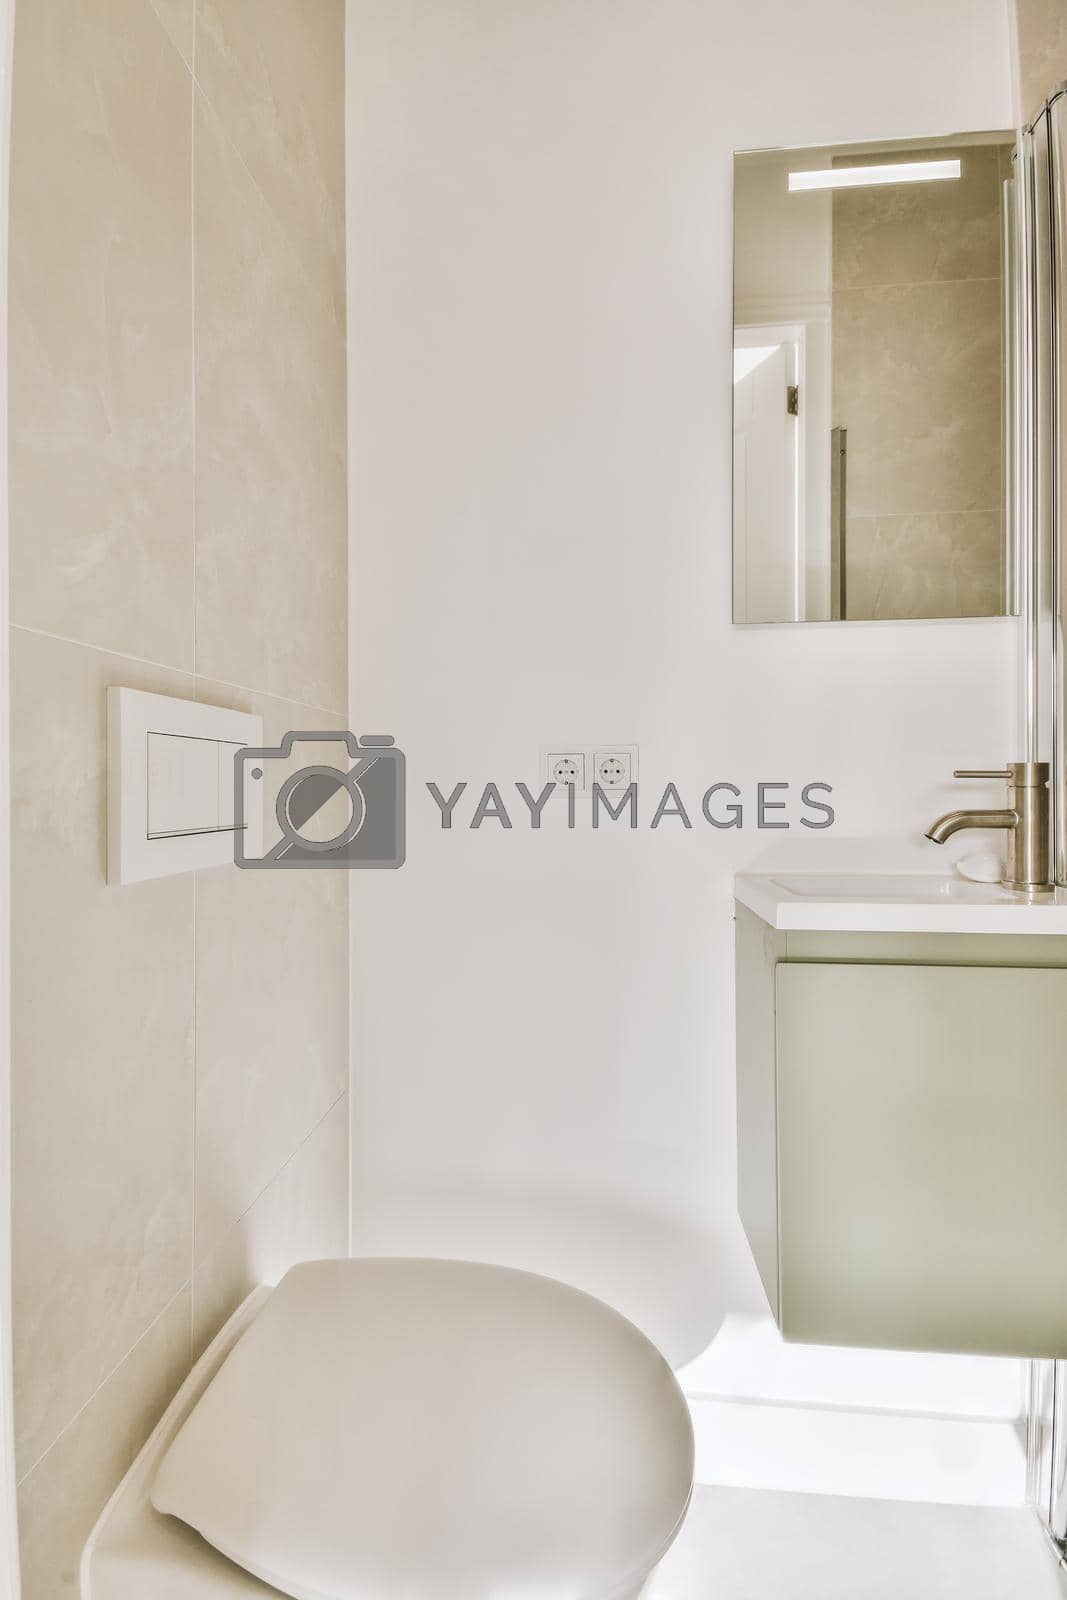 Royalty free image of Tap near sink and mirror by casamedia